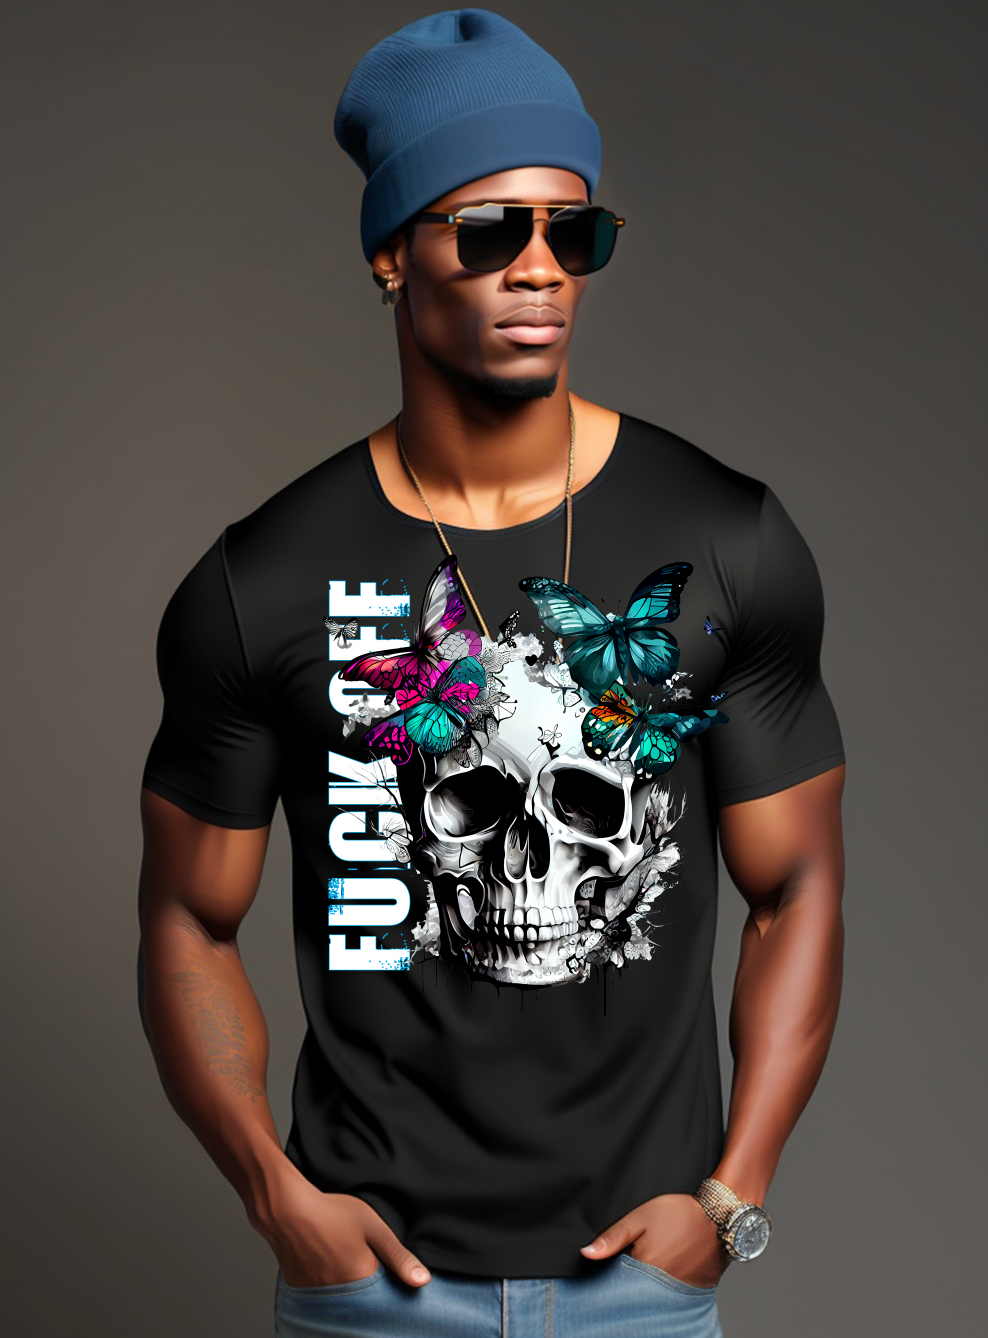 Skull with Butterflies T-Shirts | Grooveman Music